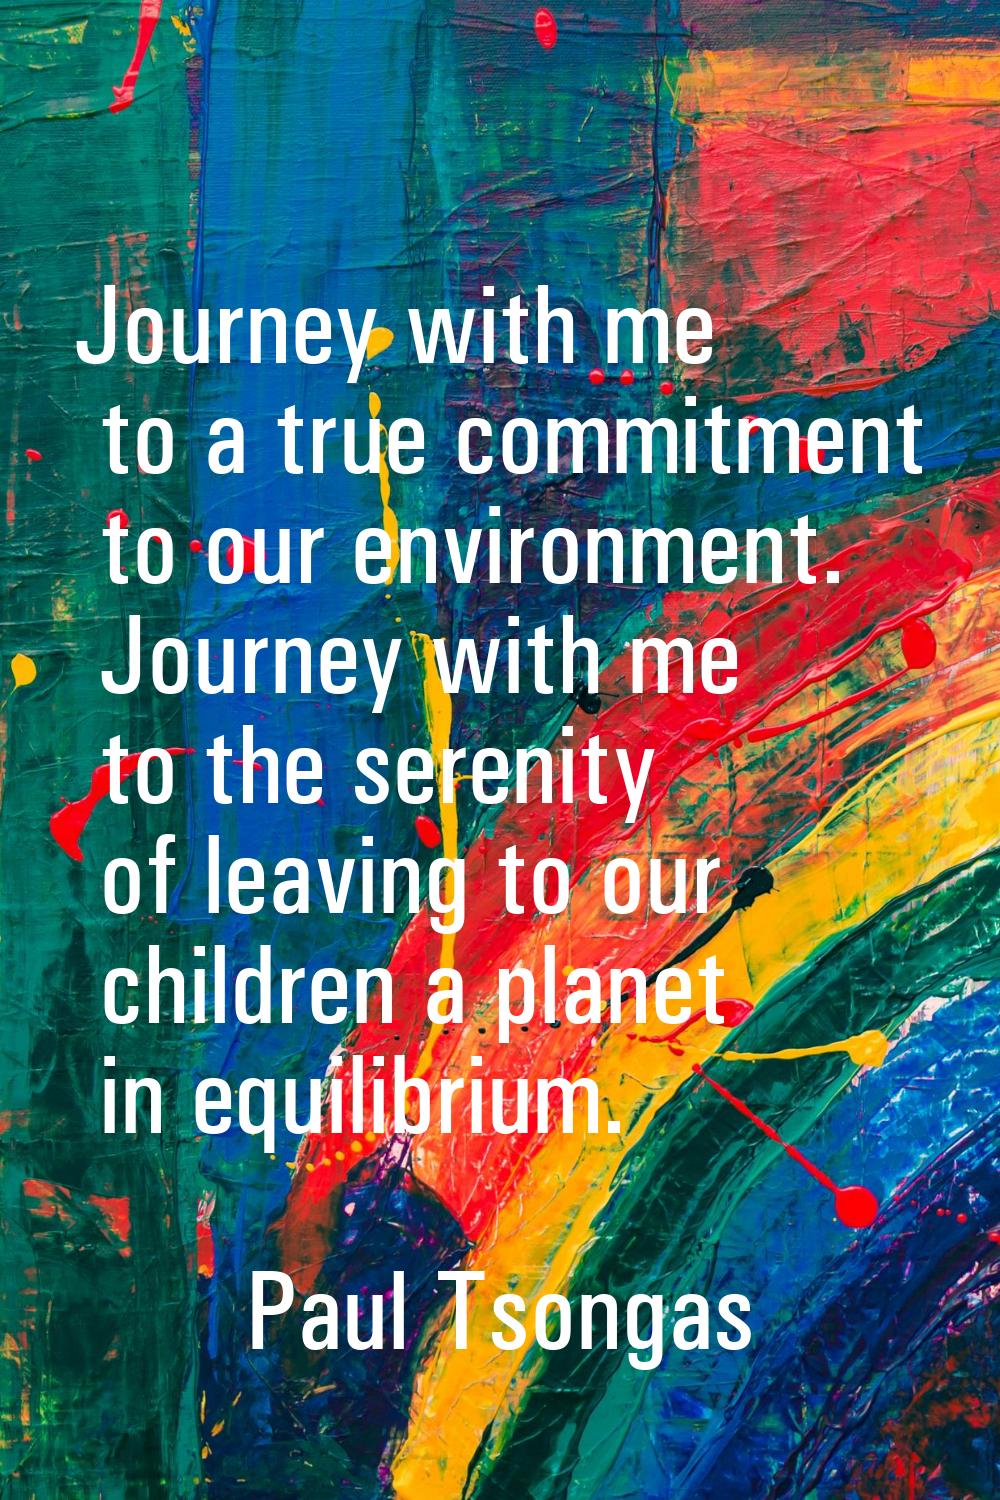 Journey with me to a true commitment to our environment. Journey with me to the serenity of leaving